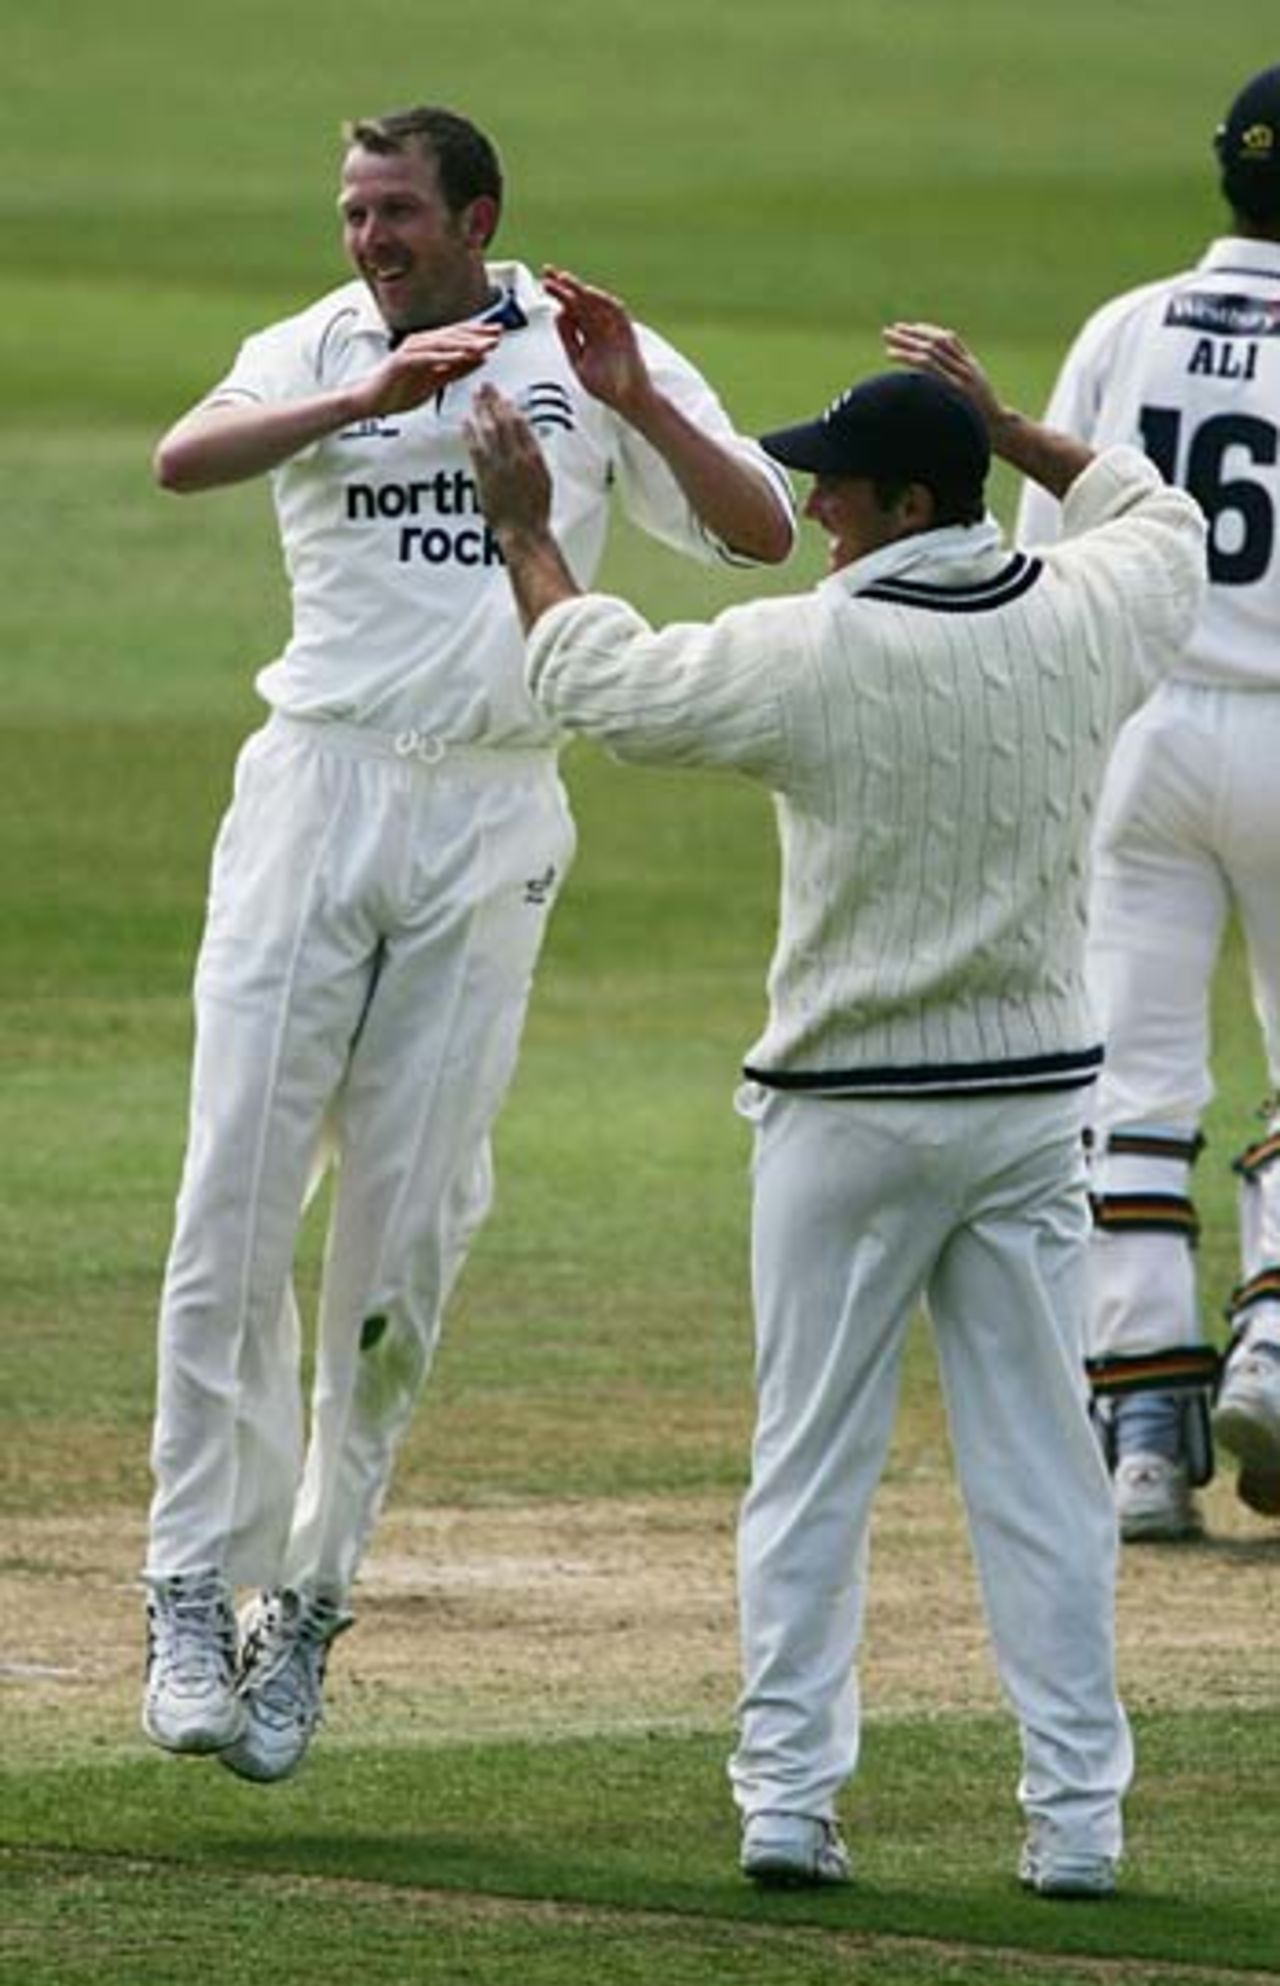 Alan Richardson celebrates the wicket of Kadeer Ali, Middlesex v Gloucestershire, Lord's, May 12 2005